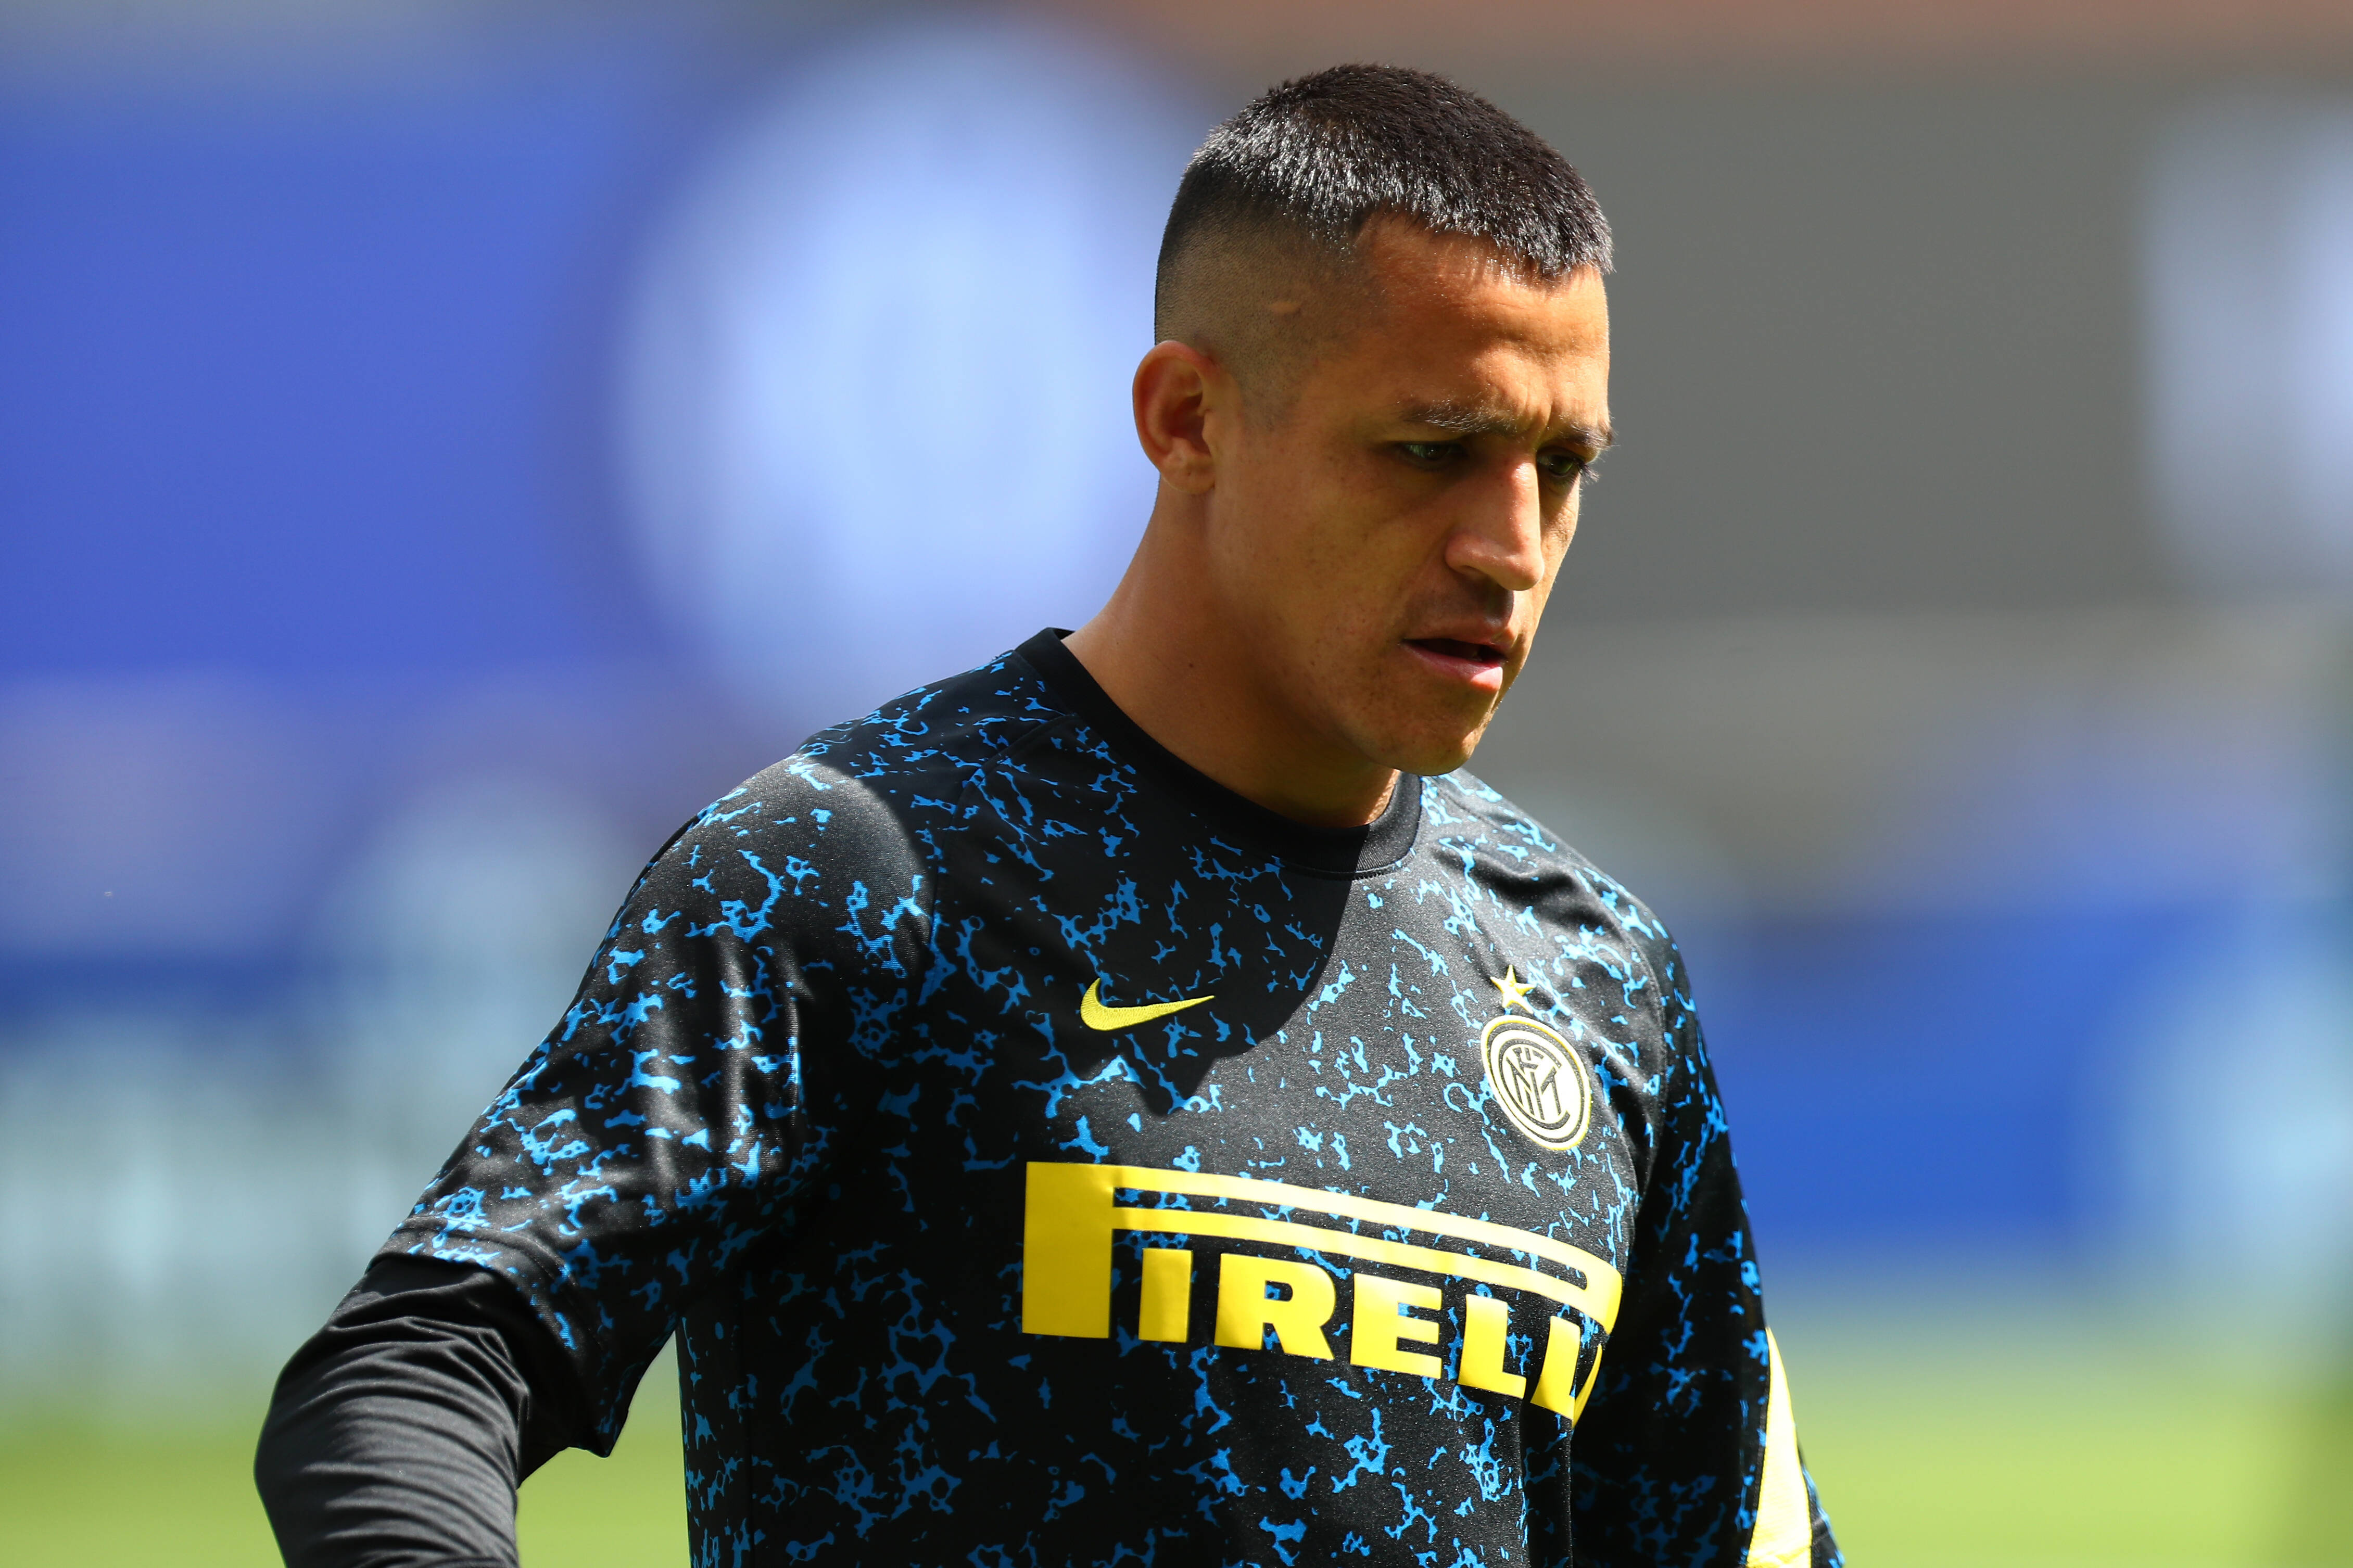 Alexis Sanchez Of Fc Internazionale Looks On Before The Serie A Match Between Fc Internazionale And Hellas Verona Fc At